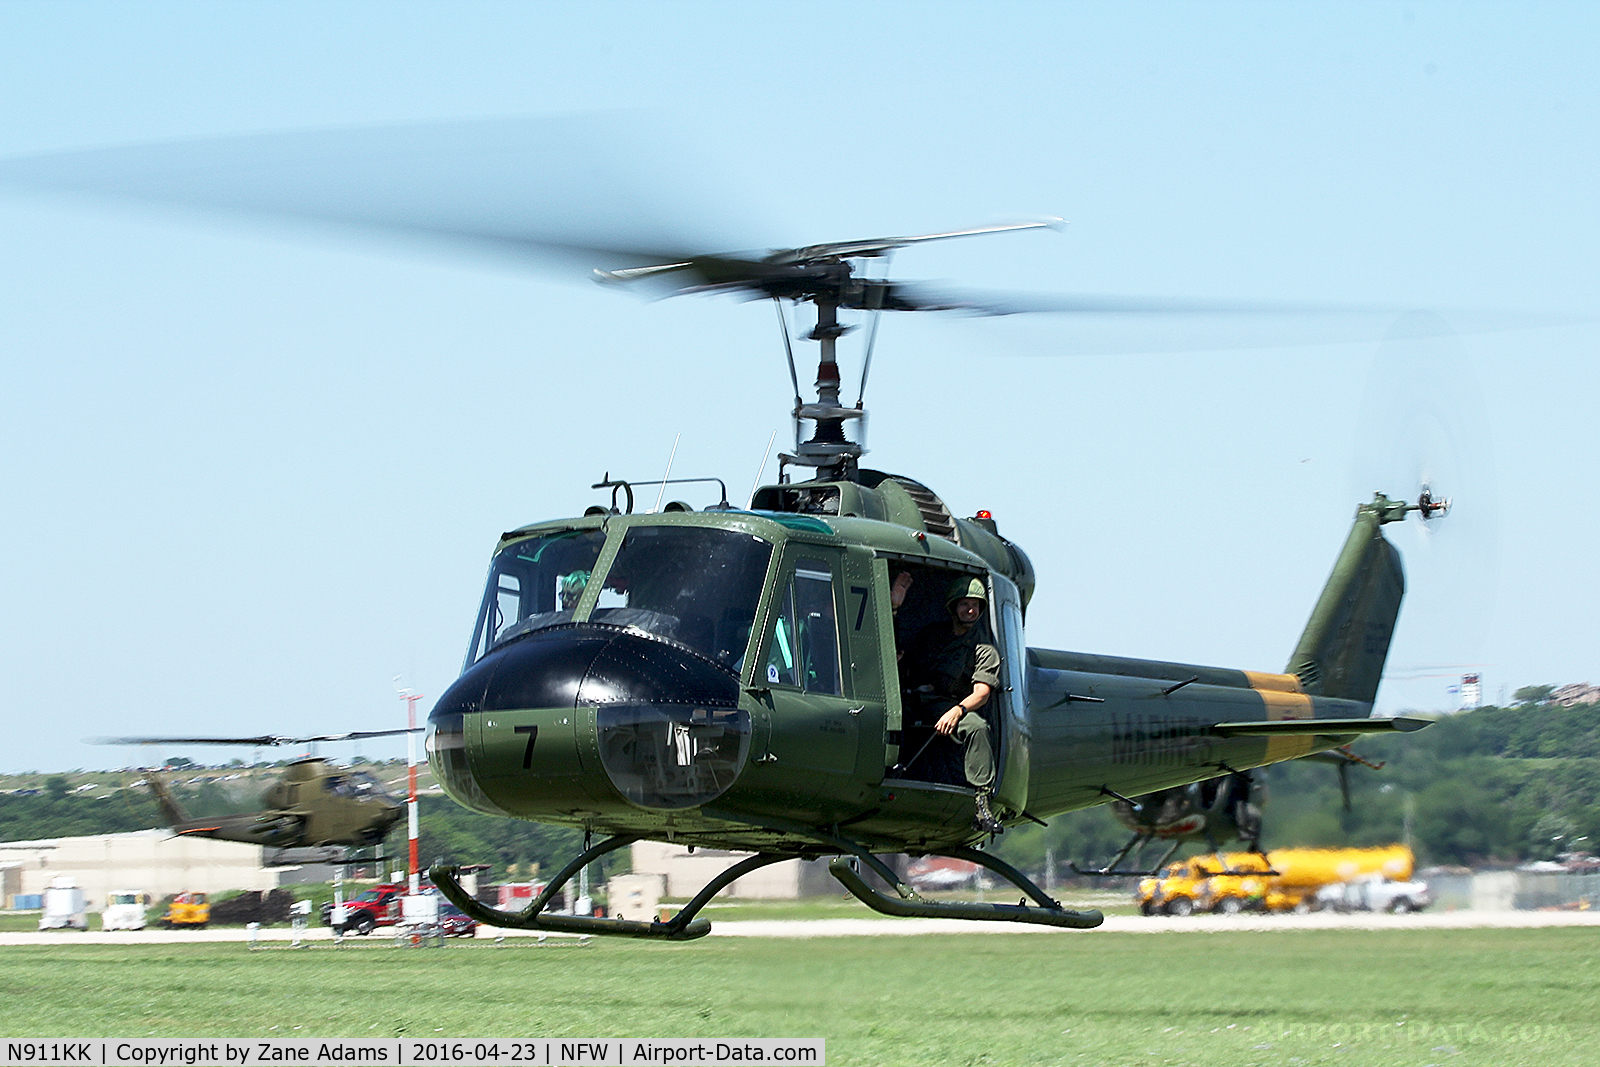 N911KK, 1966 Bell UH-1E Iroquois C/N 153762/6128, At the 2016 Air Power Expo - NAS Fort Worth